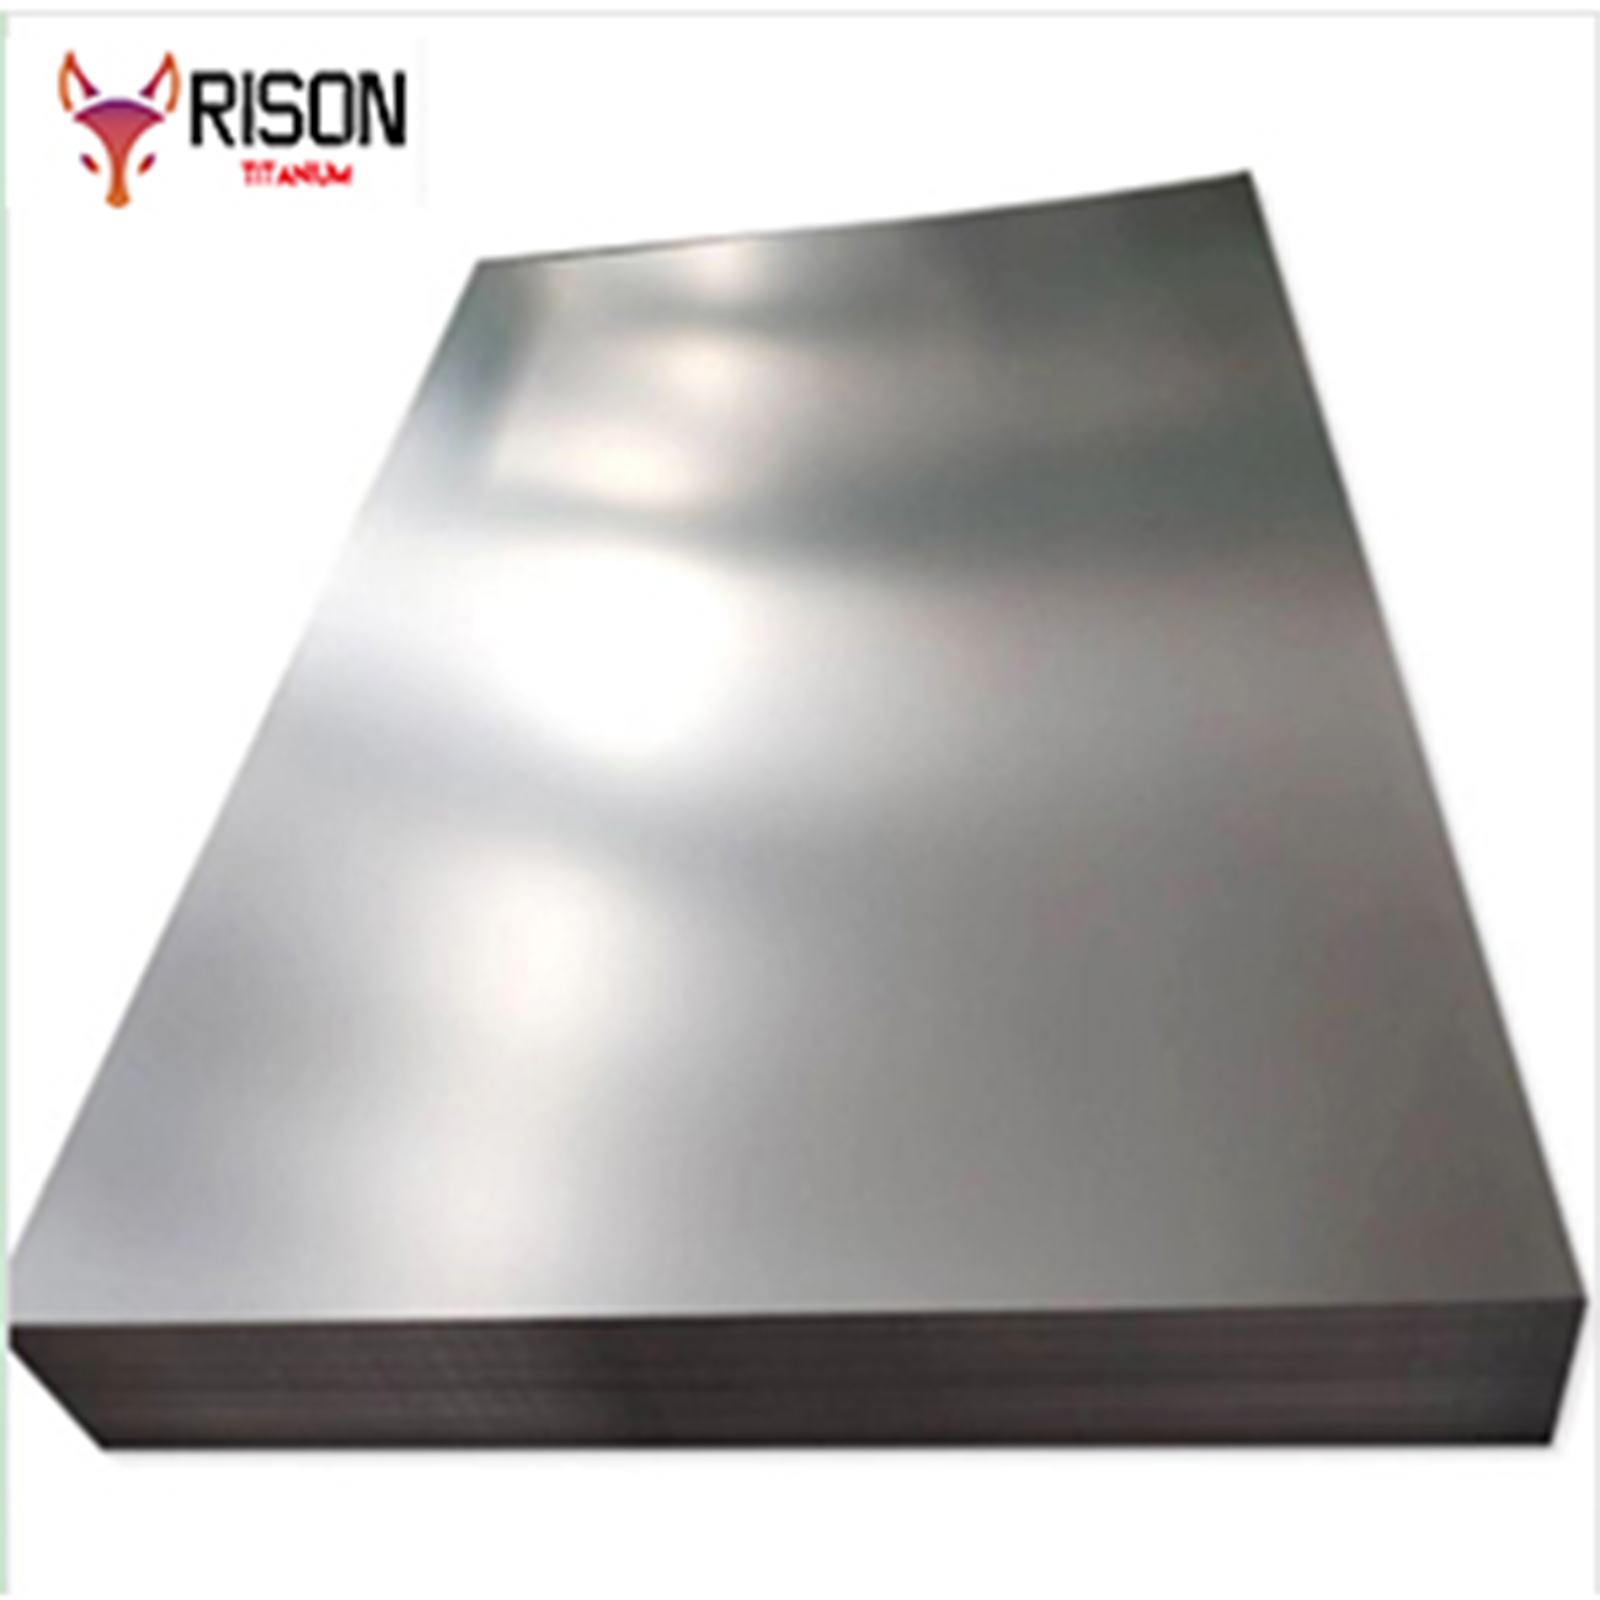 SHOUCAN Ta2 Titanium Sheet Plate 100×100mm Thickness 0.5-4mm Suitable for Aerospace Industrial,100×100×2mm 